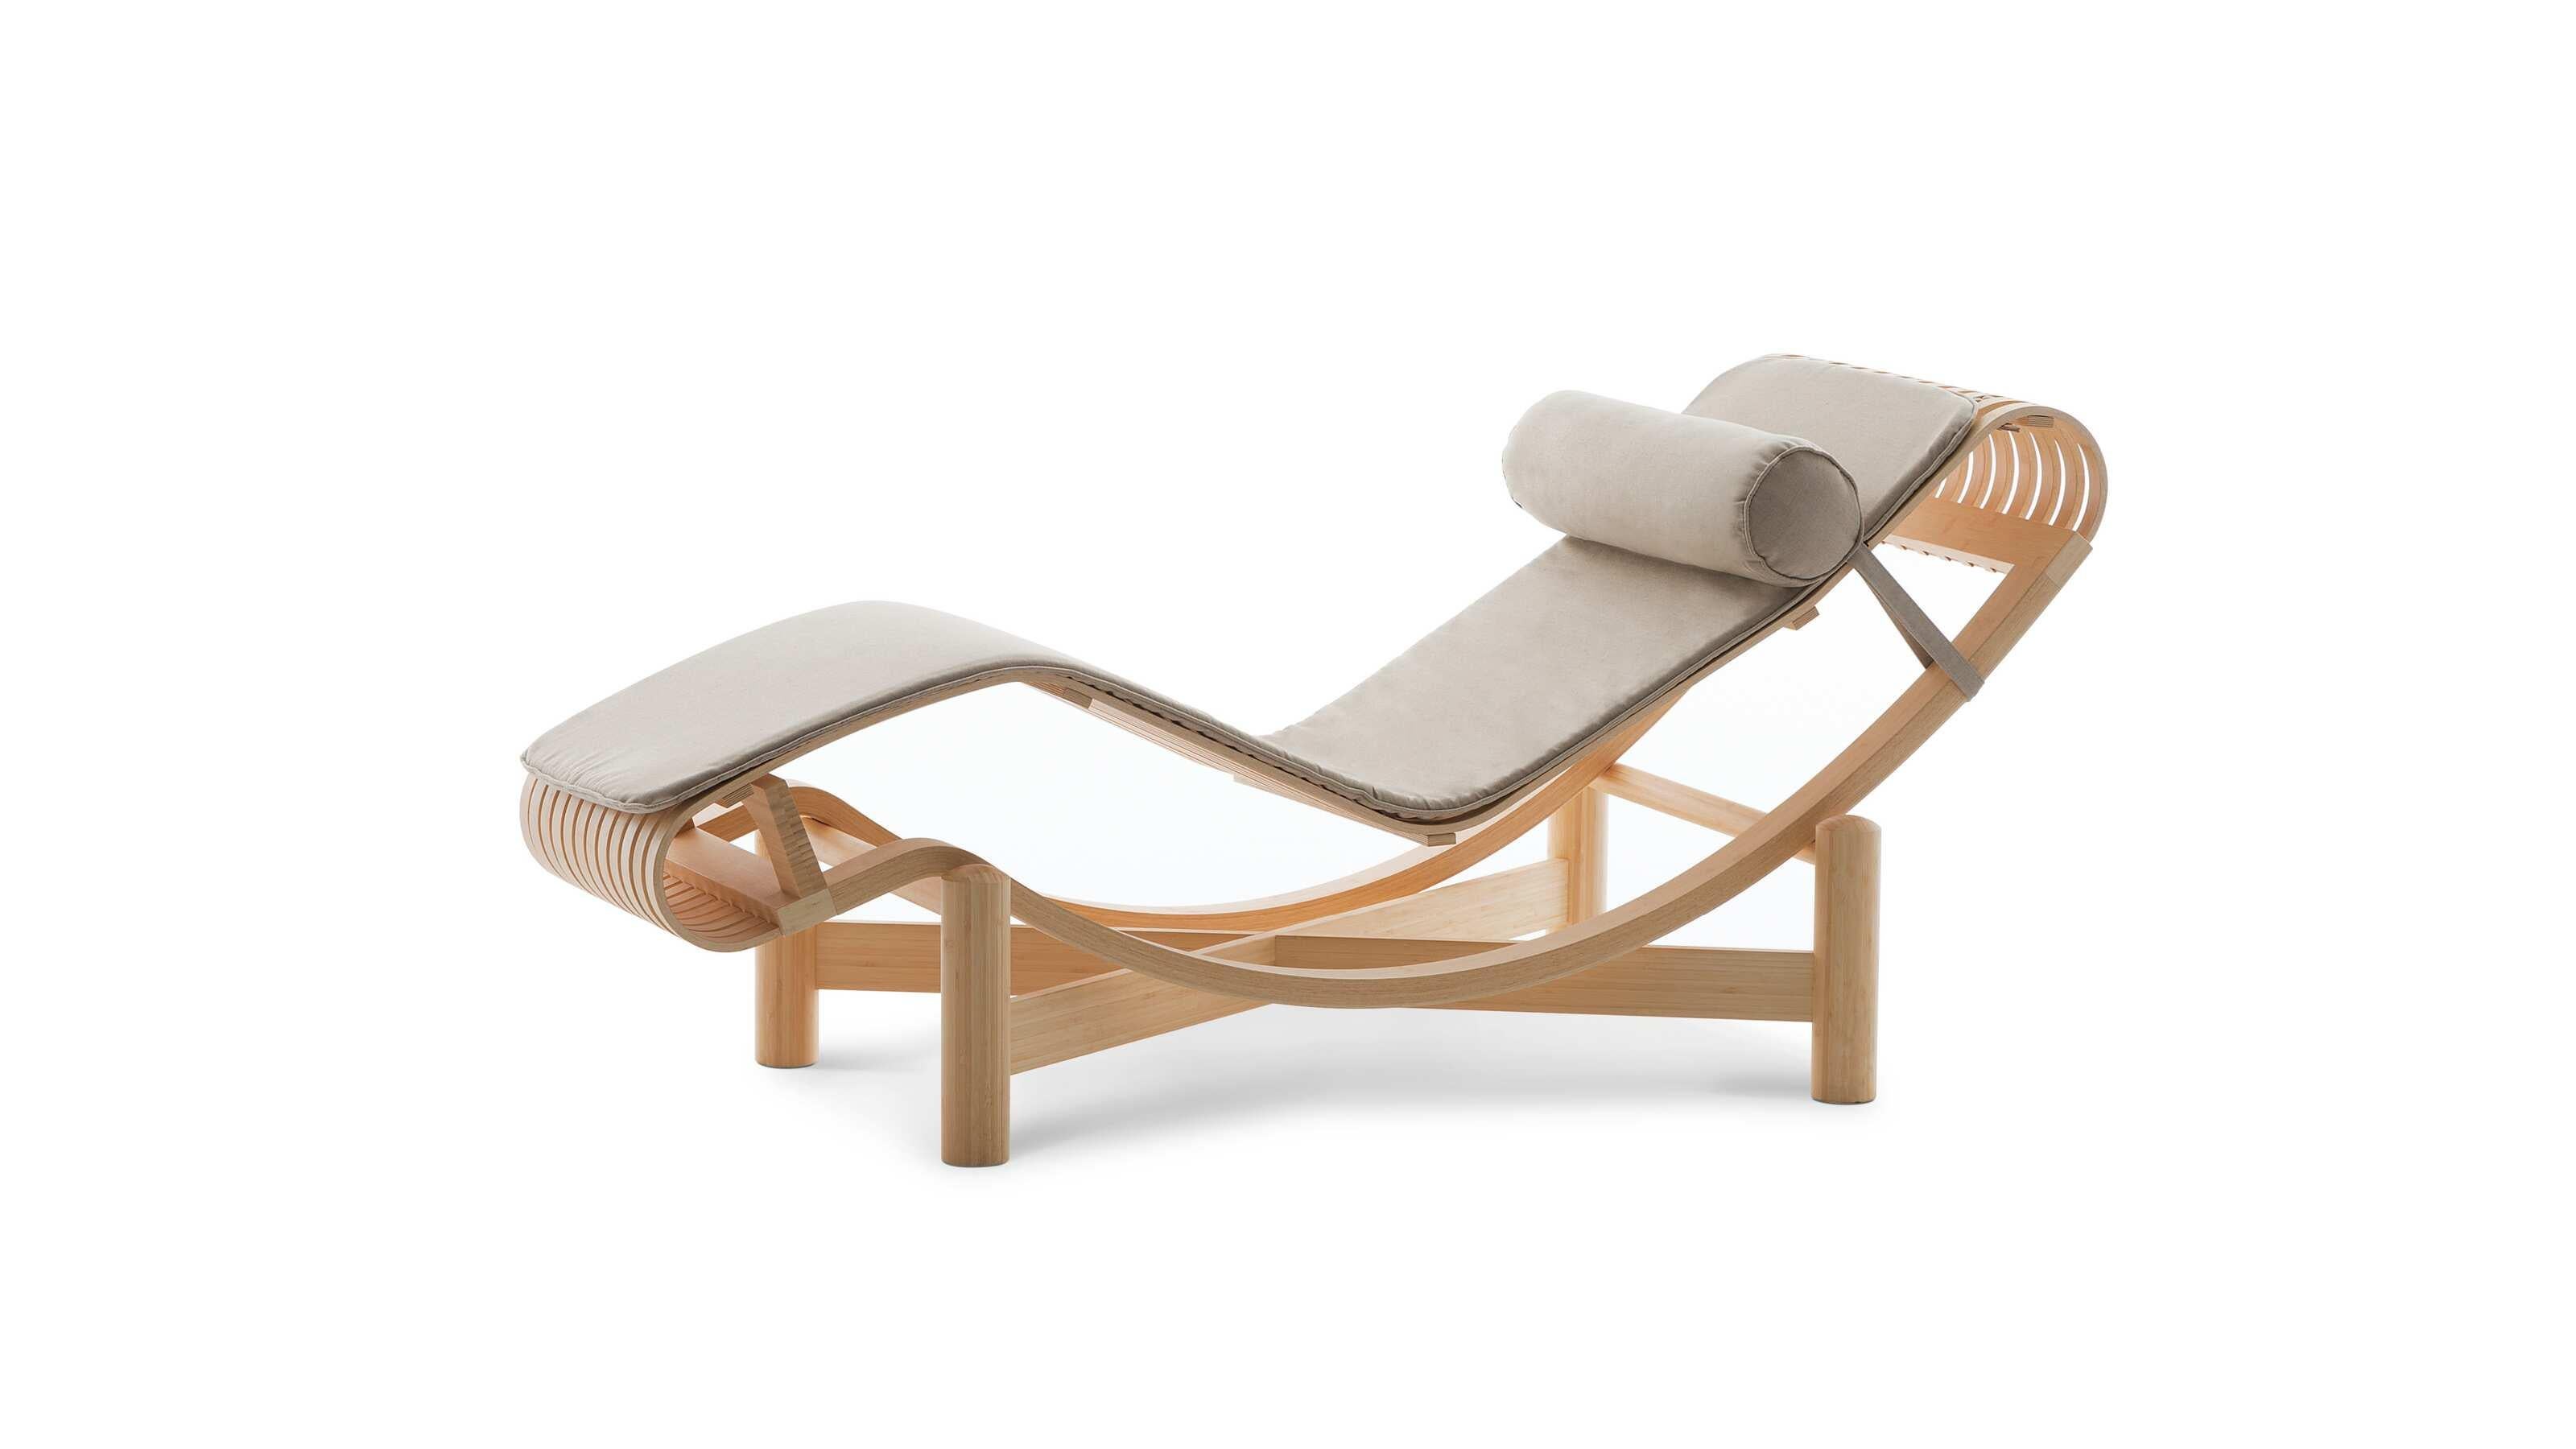 Contemporary Charlotte Perriand Tokyo Chaise Longue by Cassina